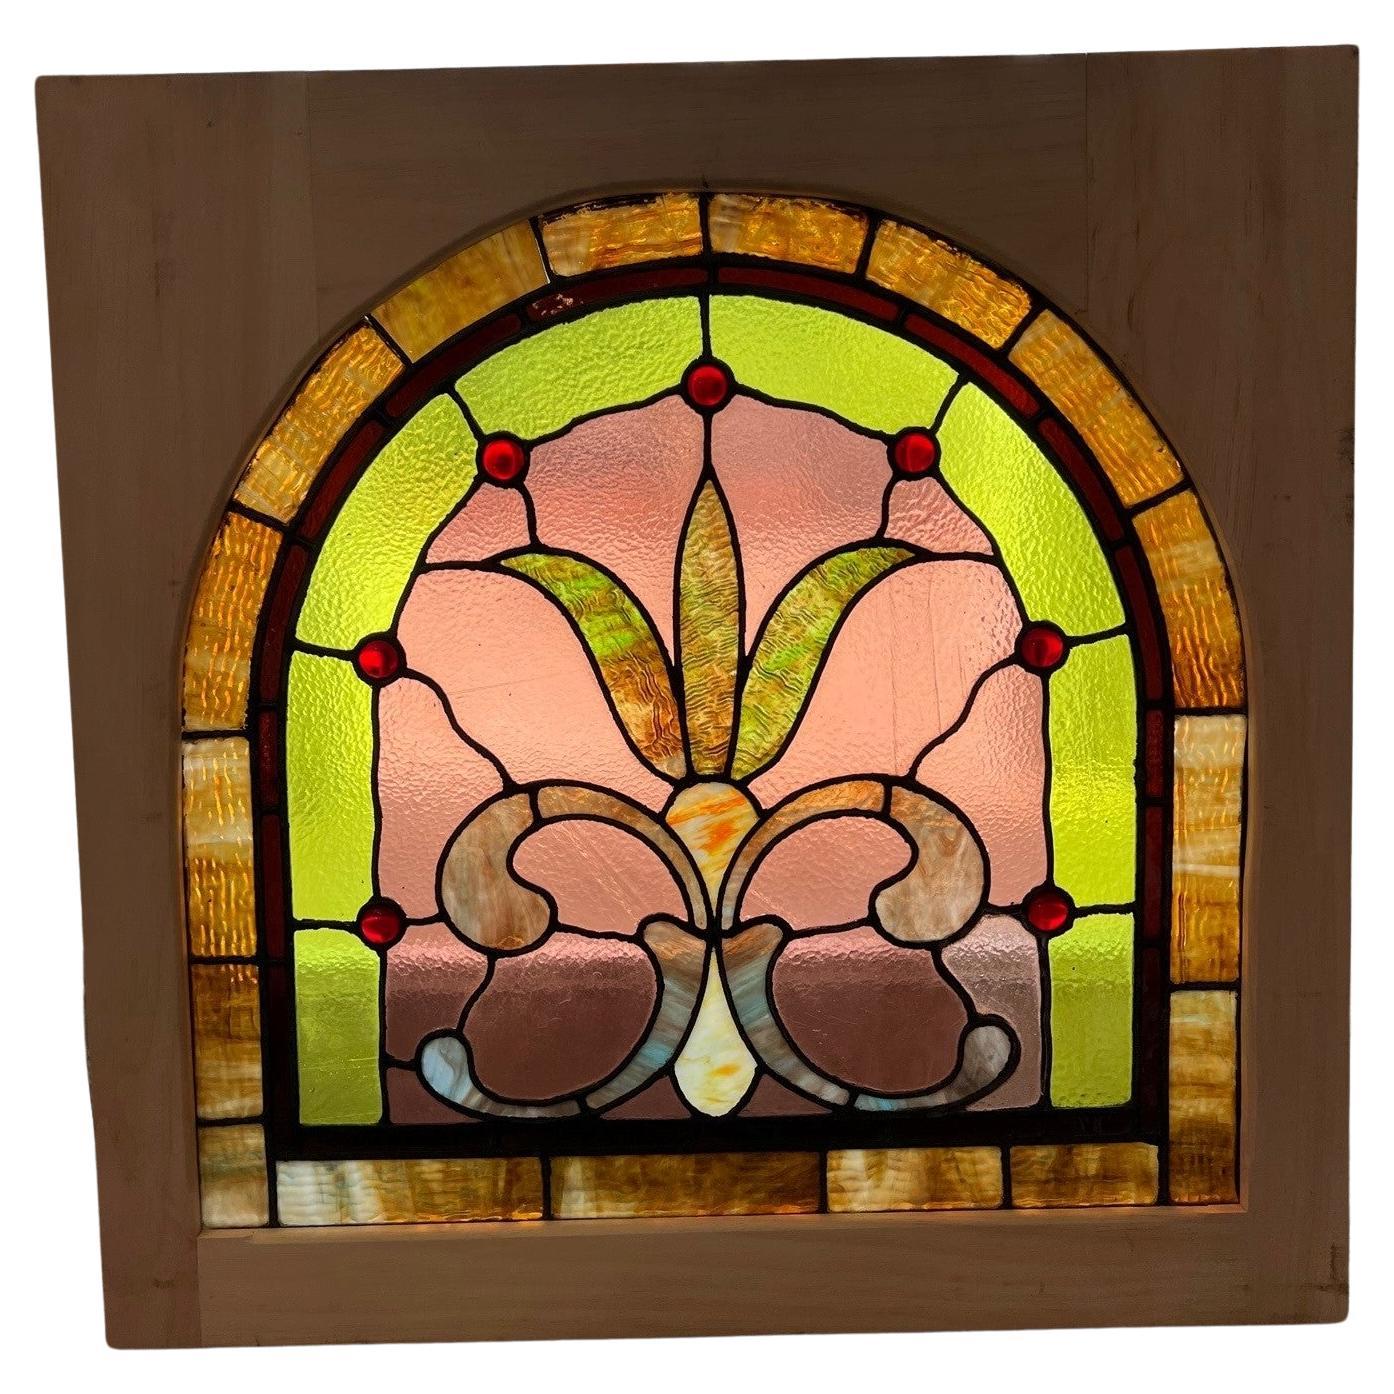 Late 19th Century Antique Arched Stained Glass Window in a New Wood Frame